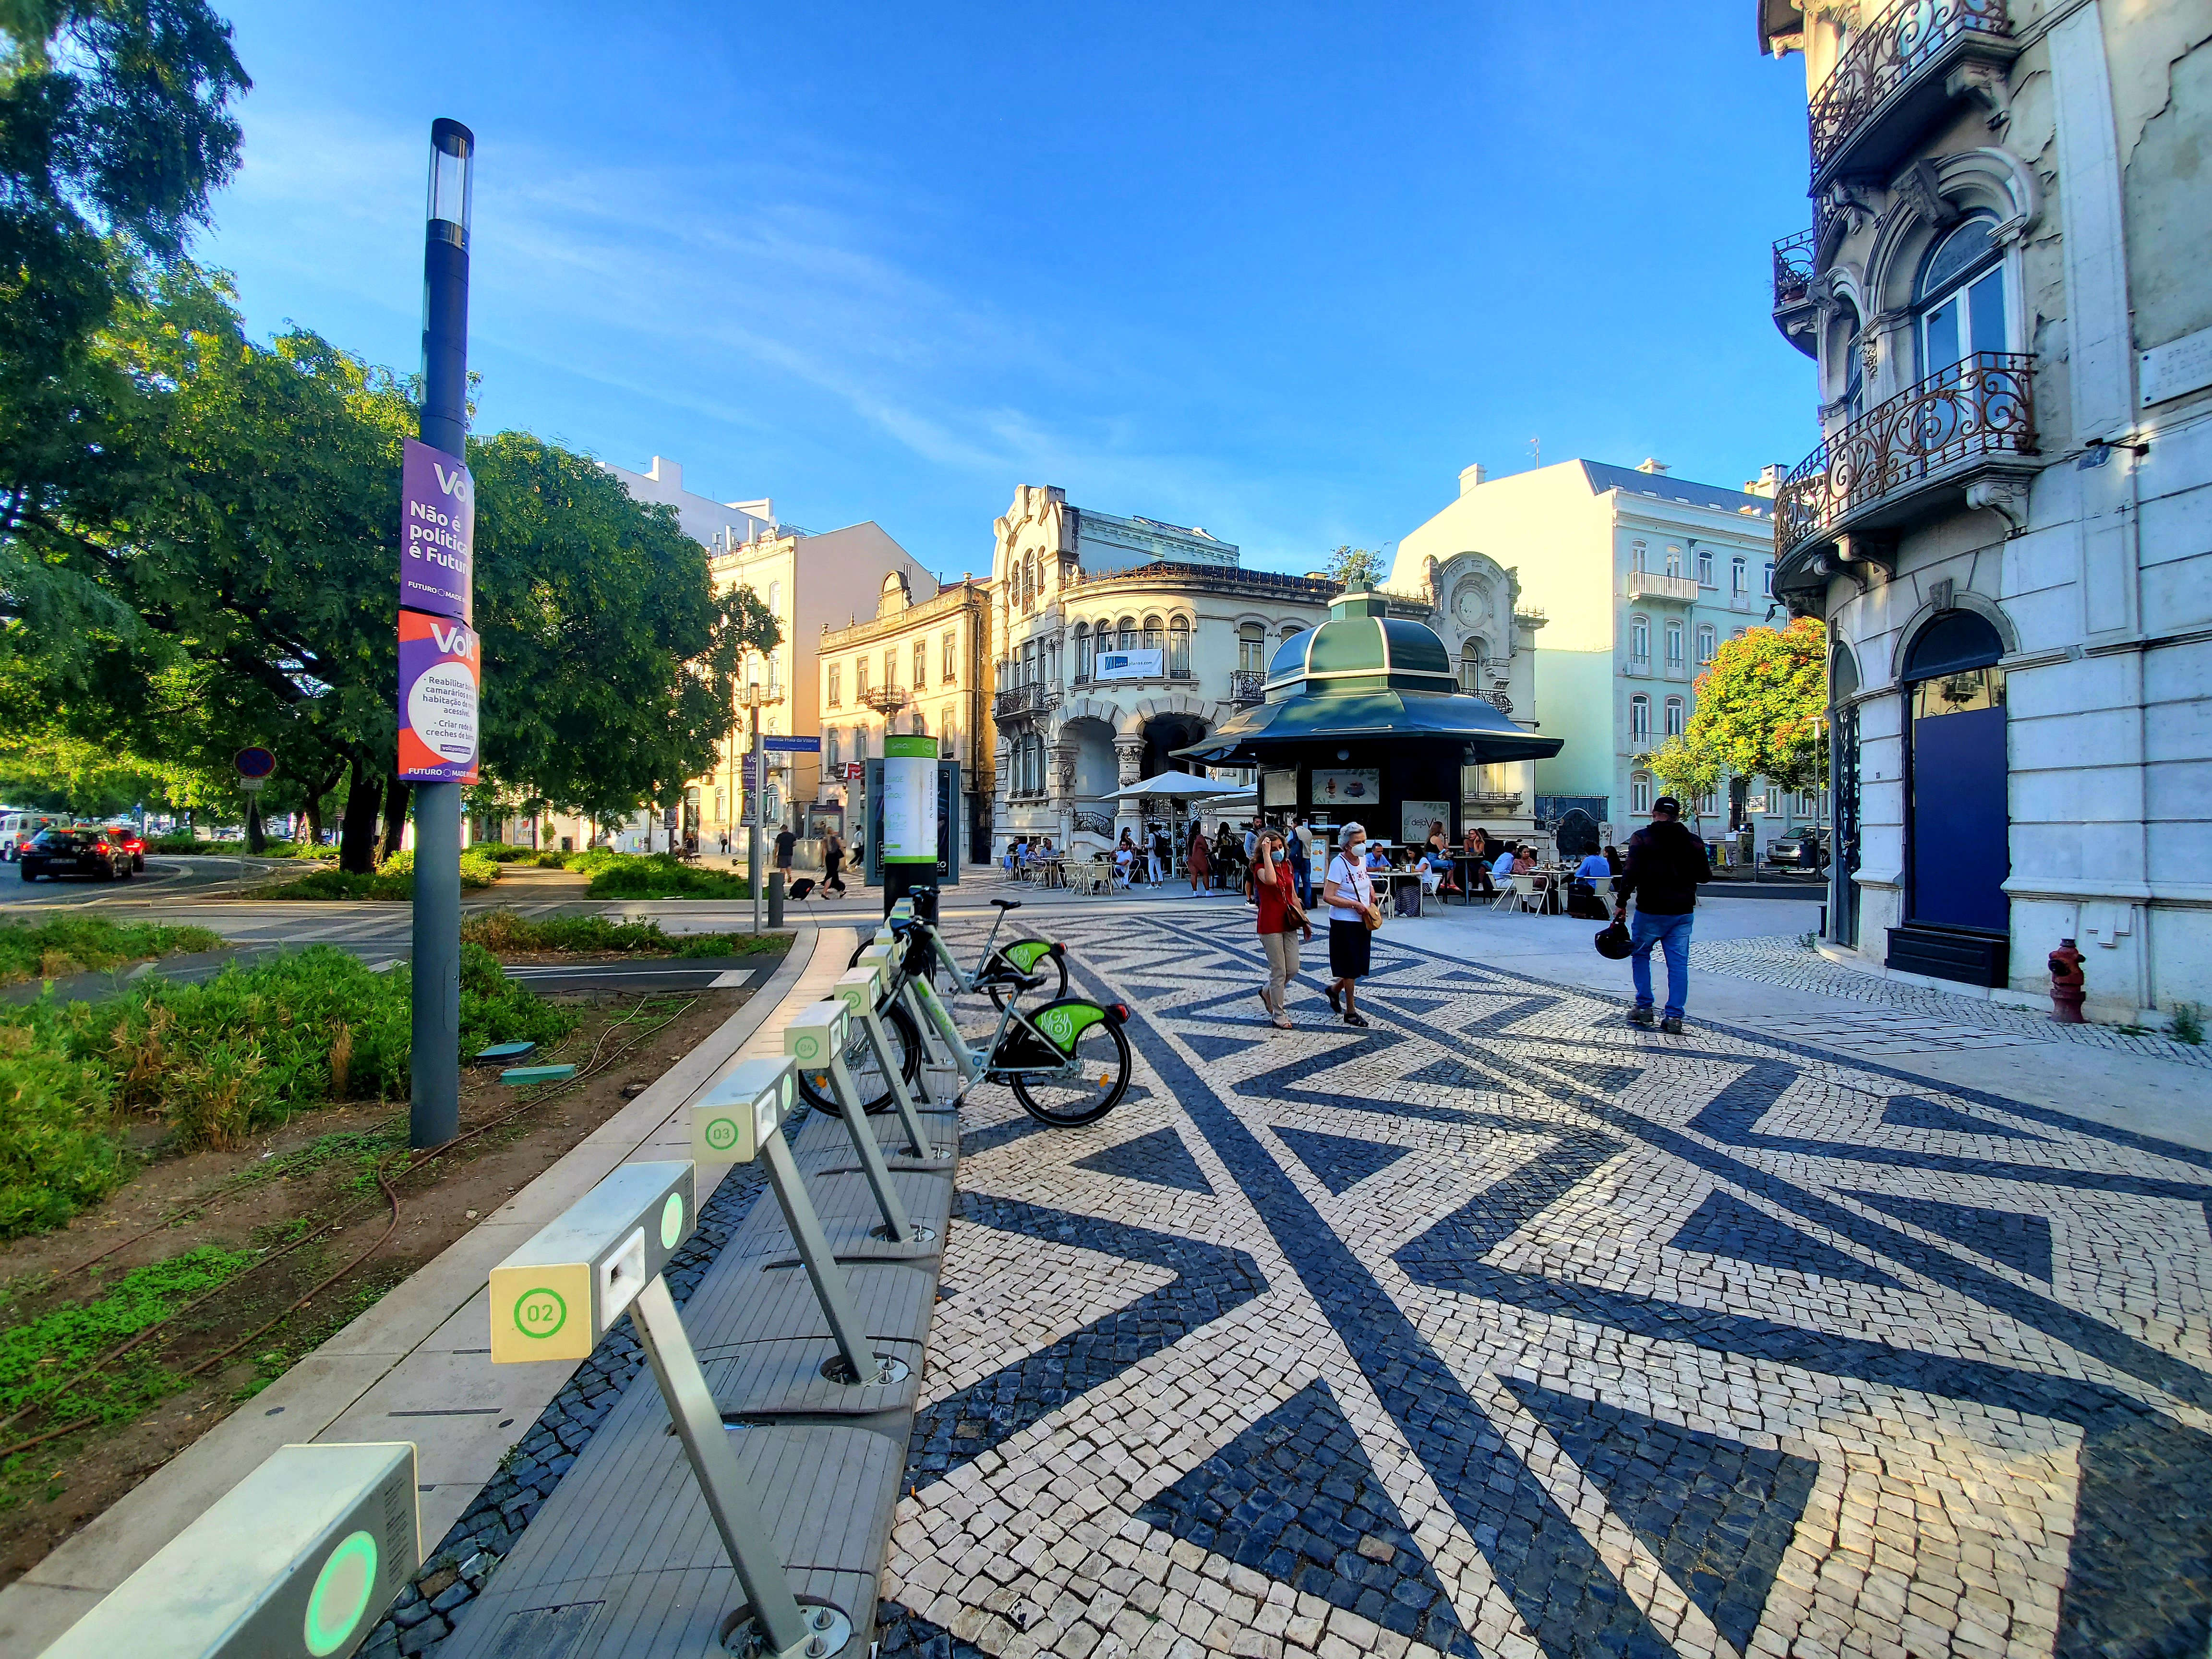 Lisbon's bikeshare system, Gira, is frequently in high demand